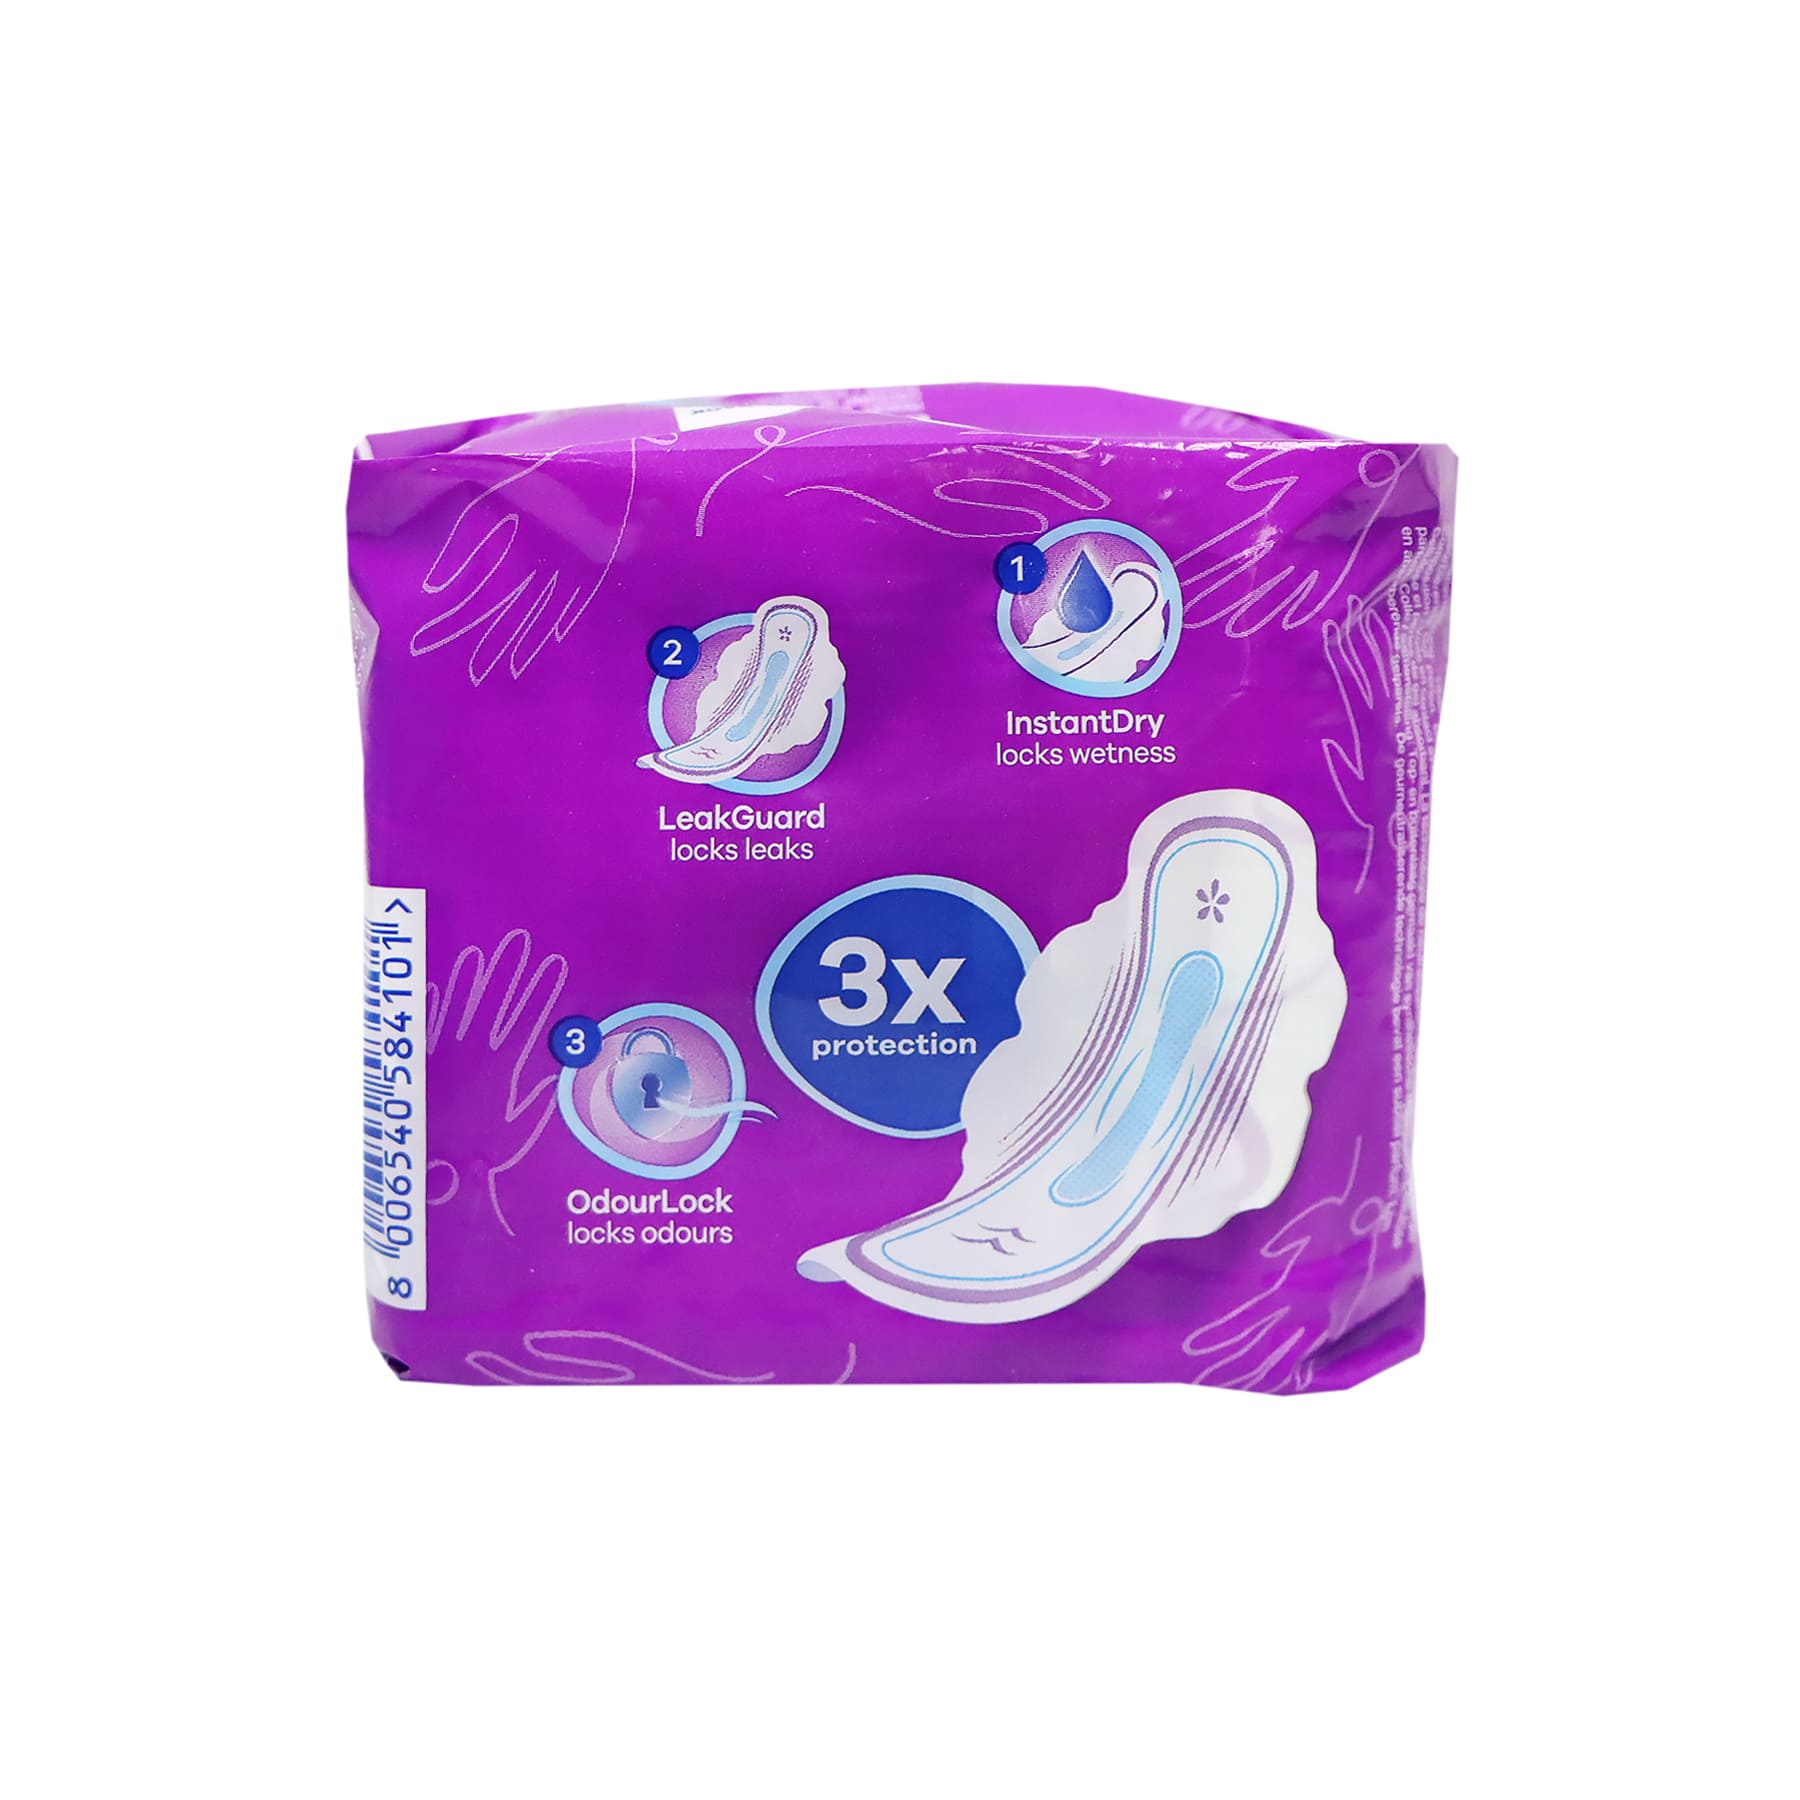 [P&G] Always Ultra Long Pads with Wings 27cm (11pcs)